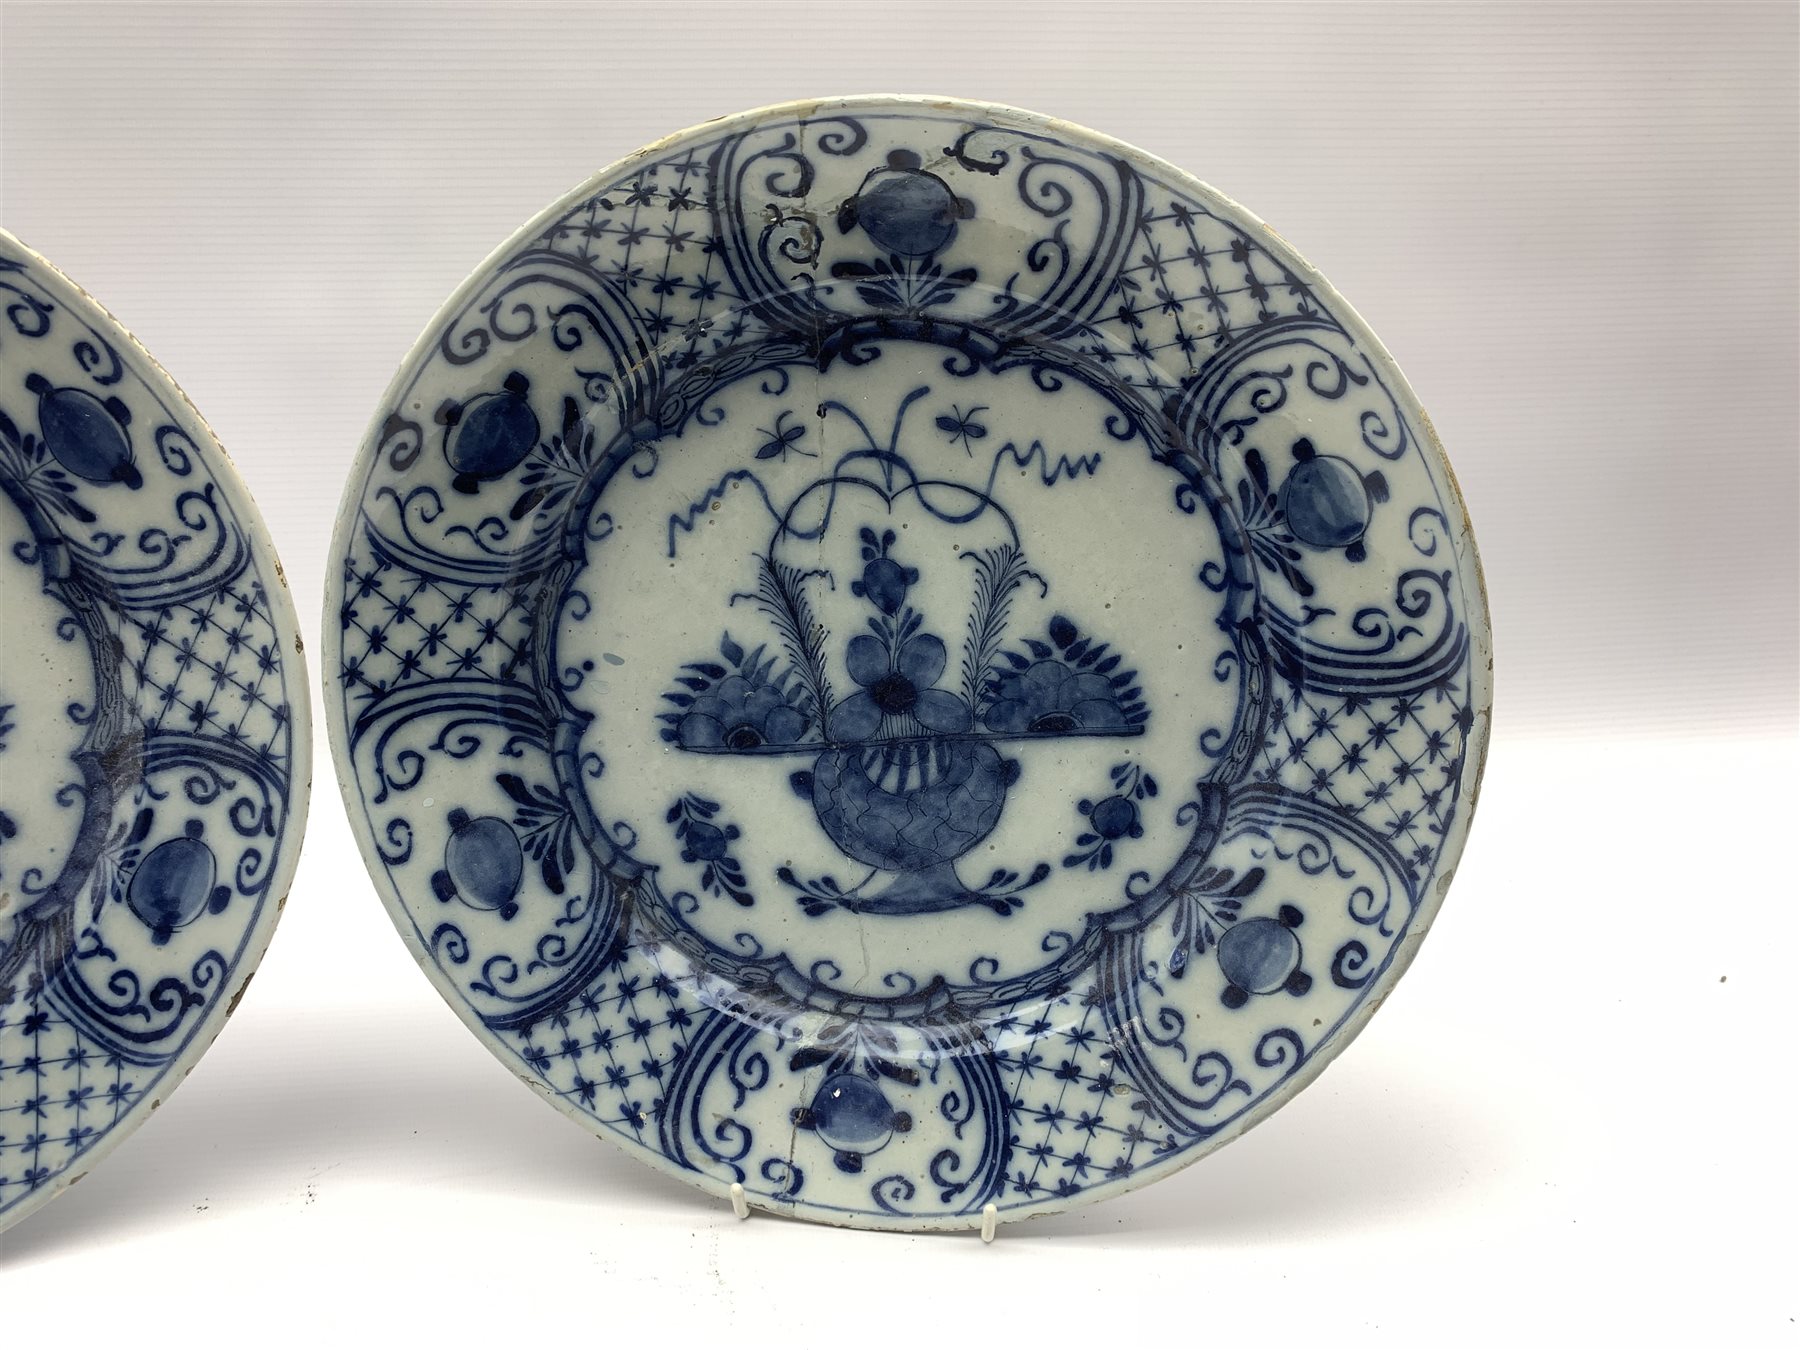 Pair of 18th century Delft blue and white chargers, centrally painted with a vase of flowers, the bo - Image 2 of 4